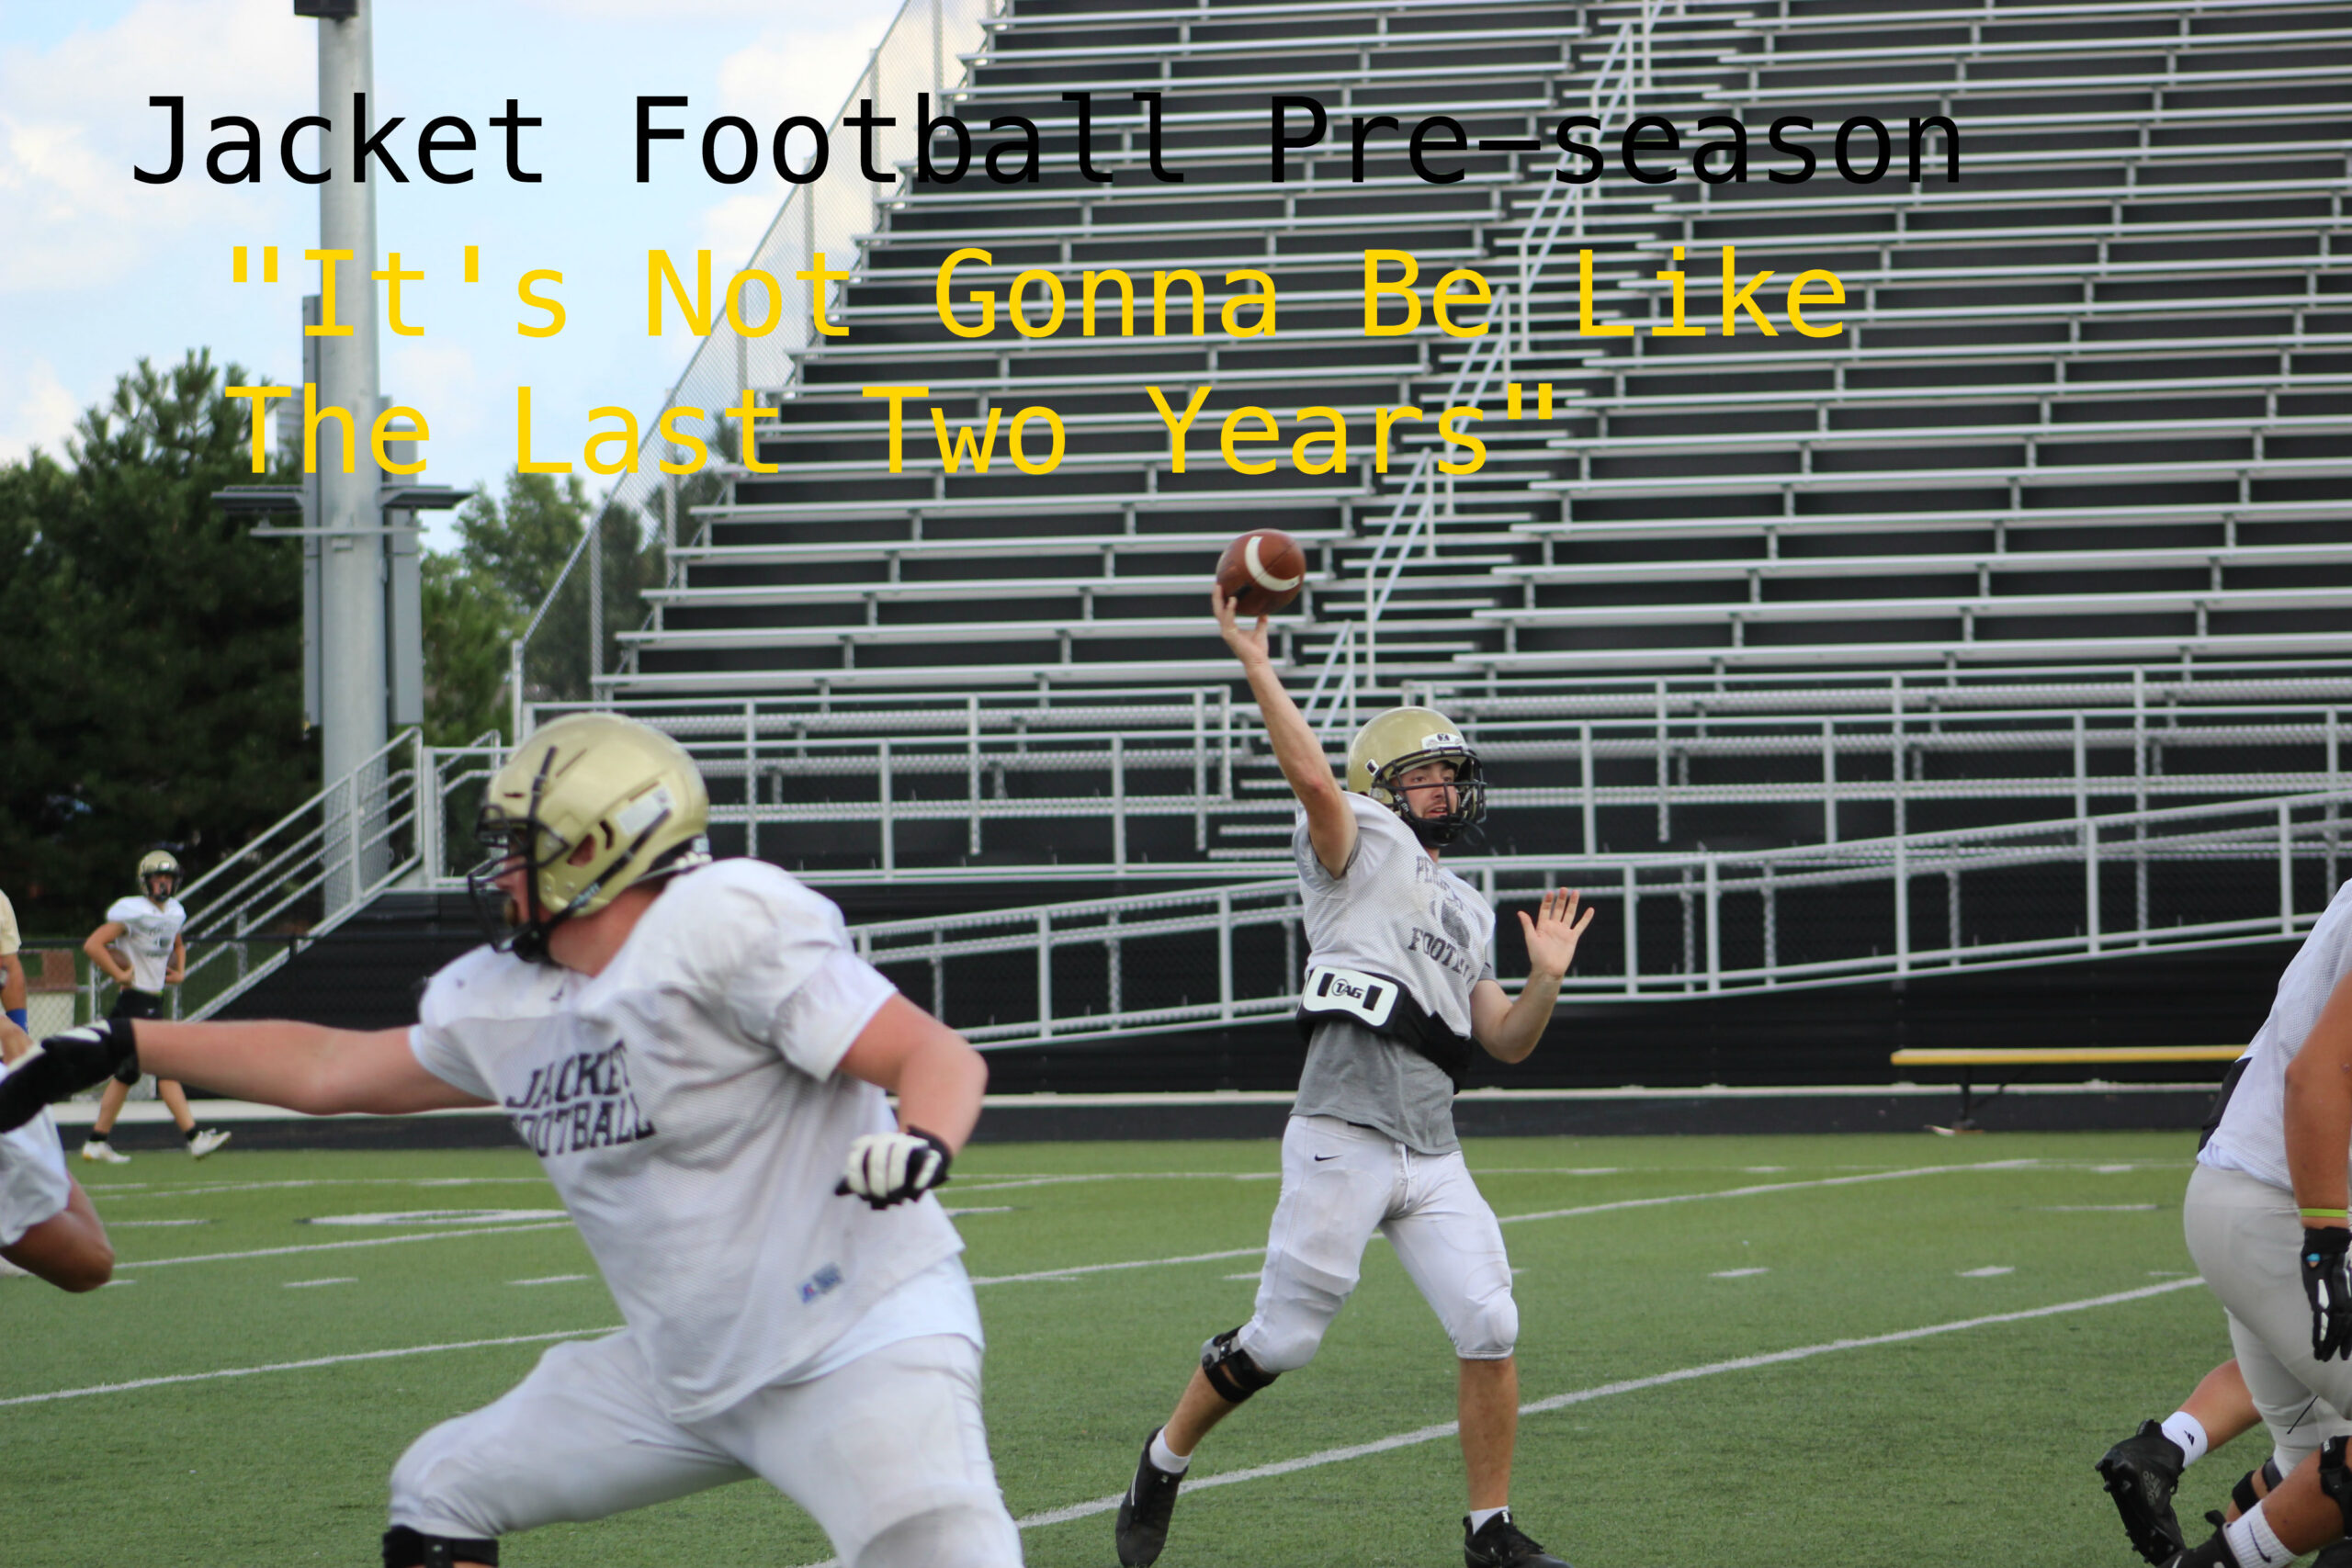 “It’s not gonna be like the last two years” The Jacket football pre-season